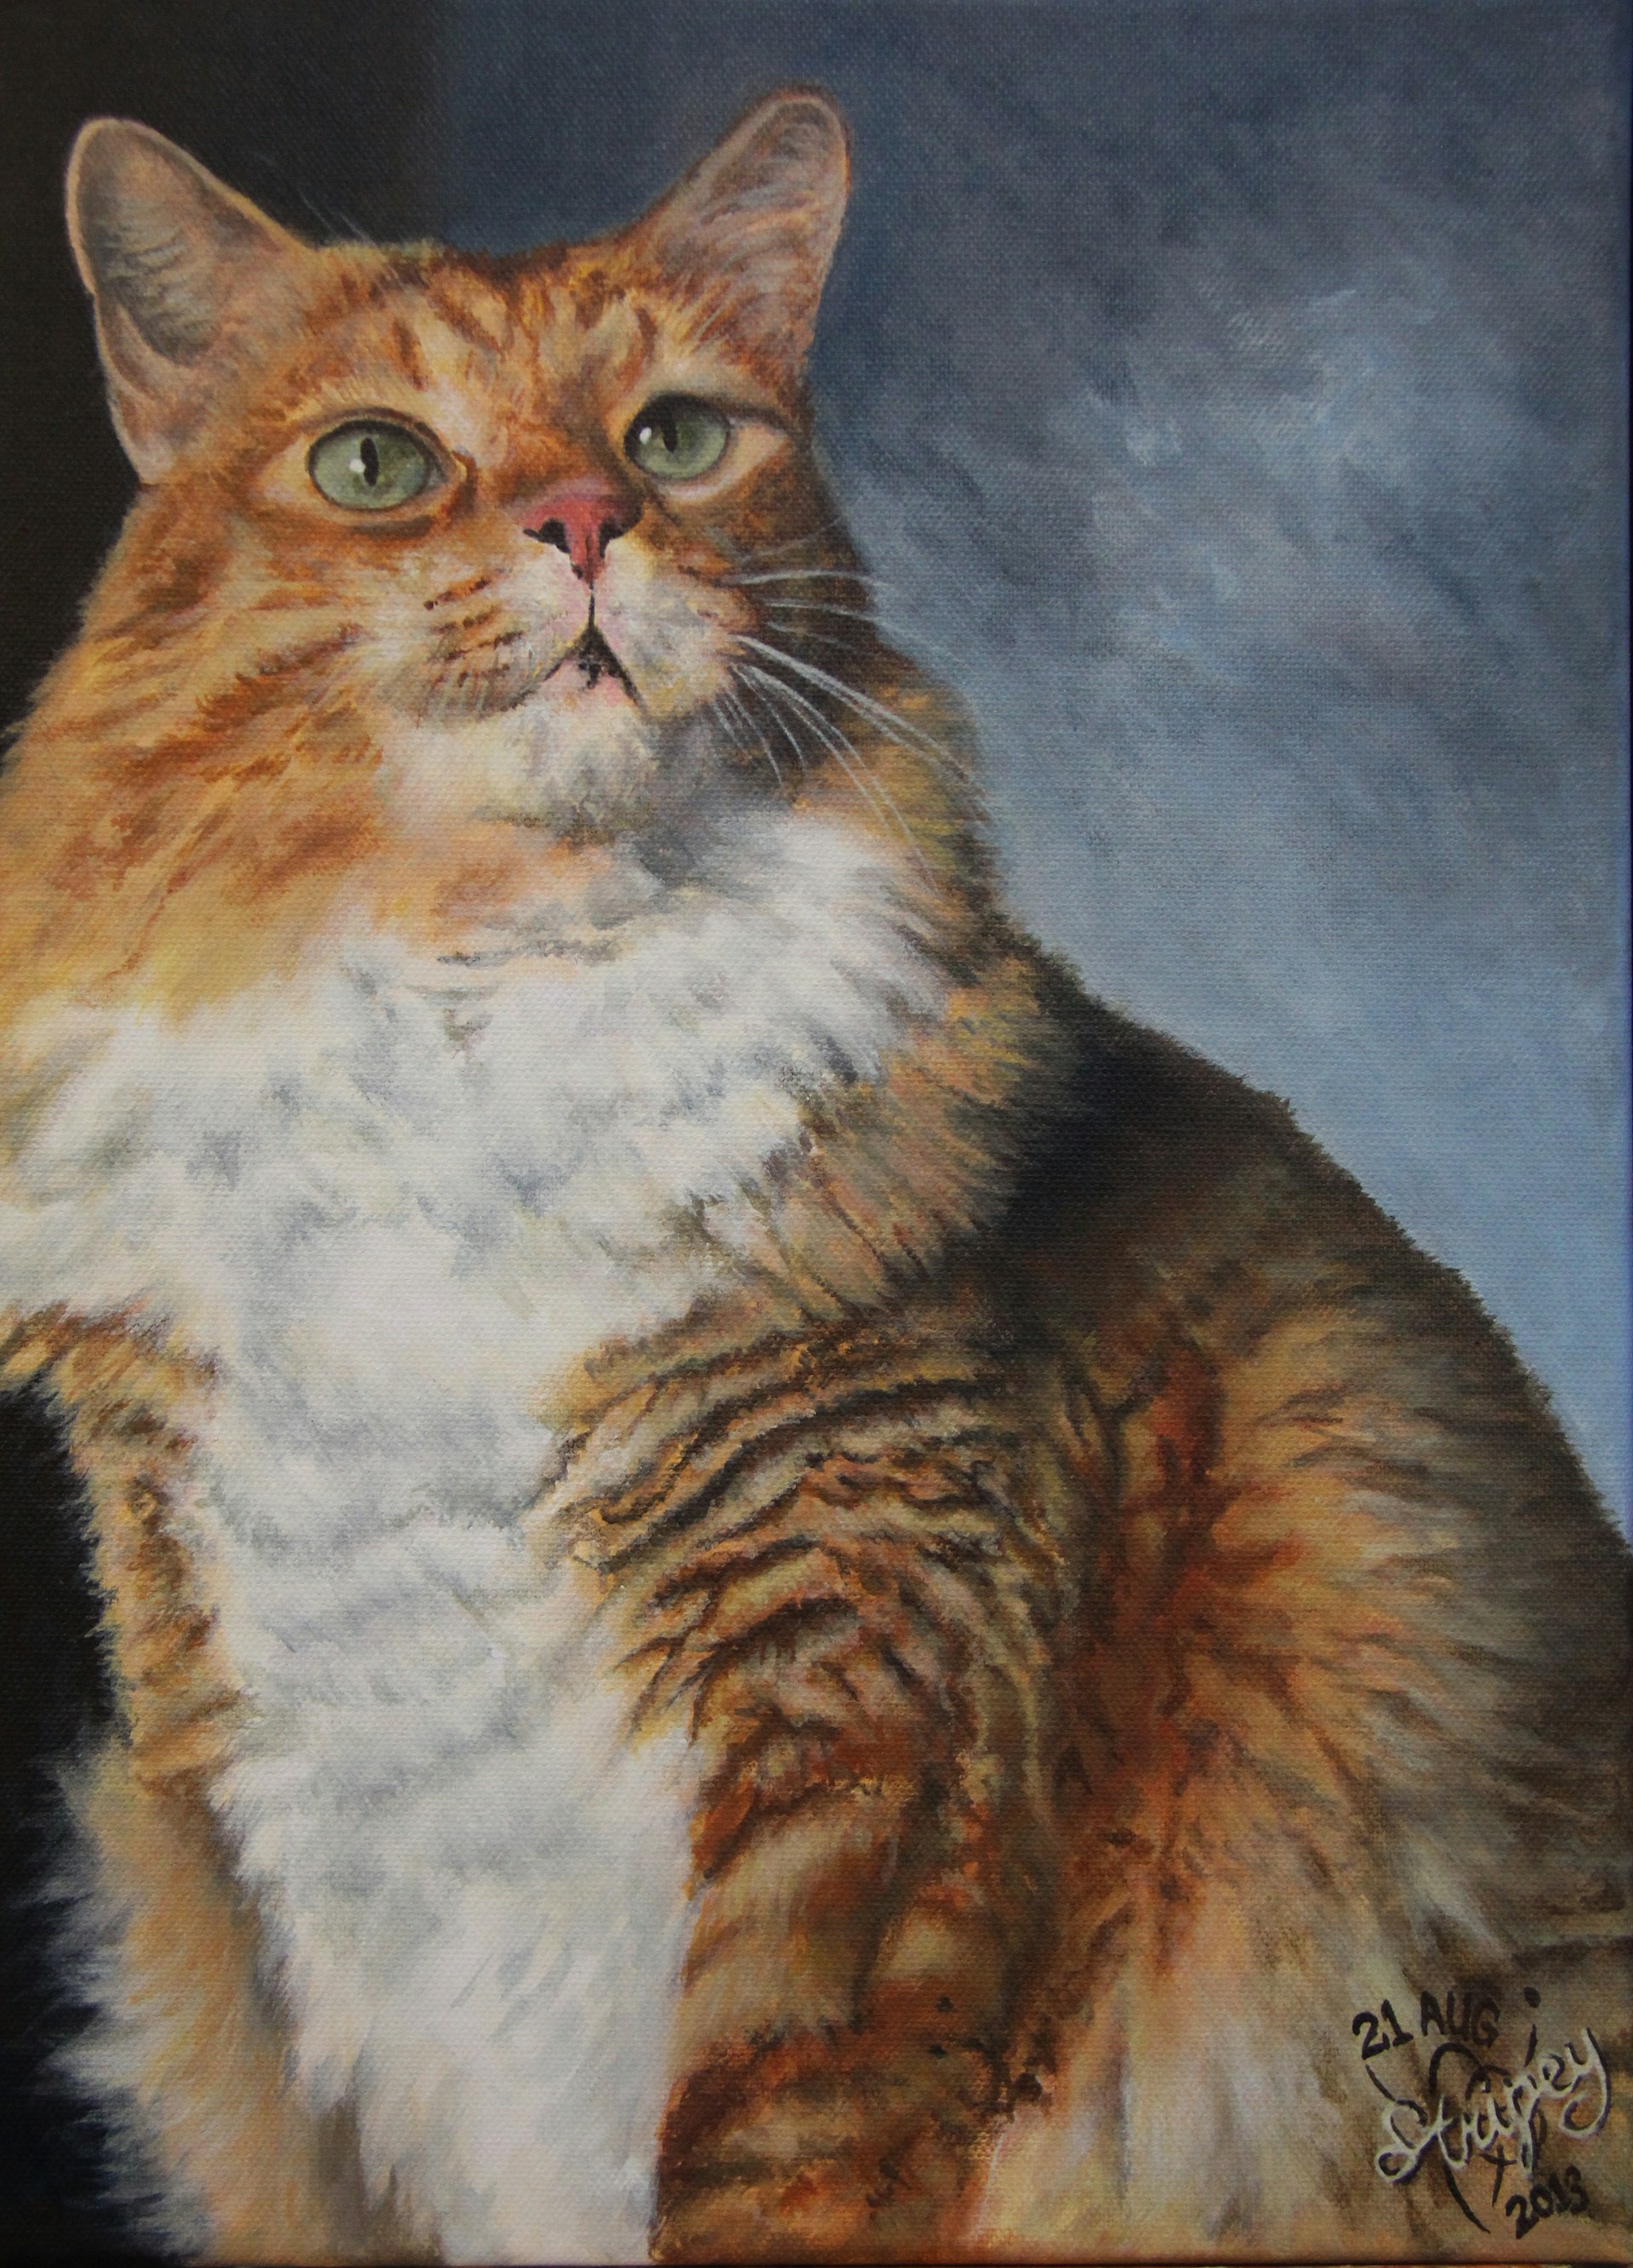 Acrylic painting of a fat fluffy maine coone cat, sitting upright and looking slightly upwards and to the right